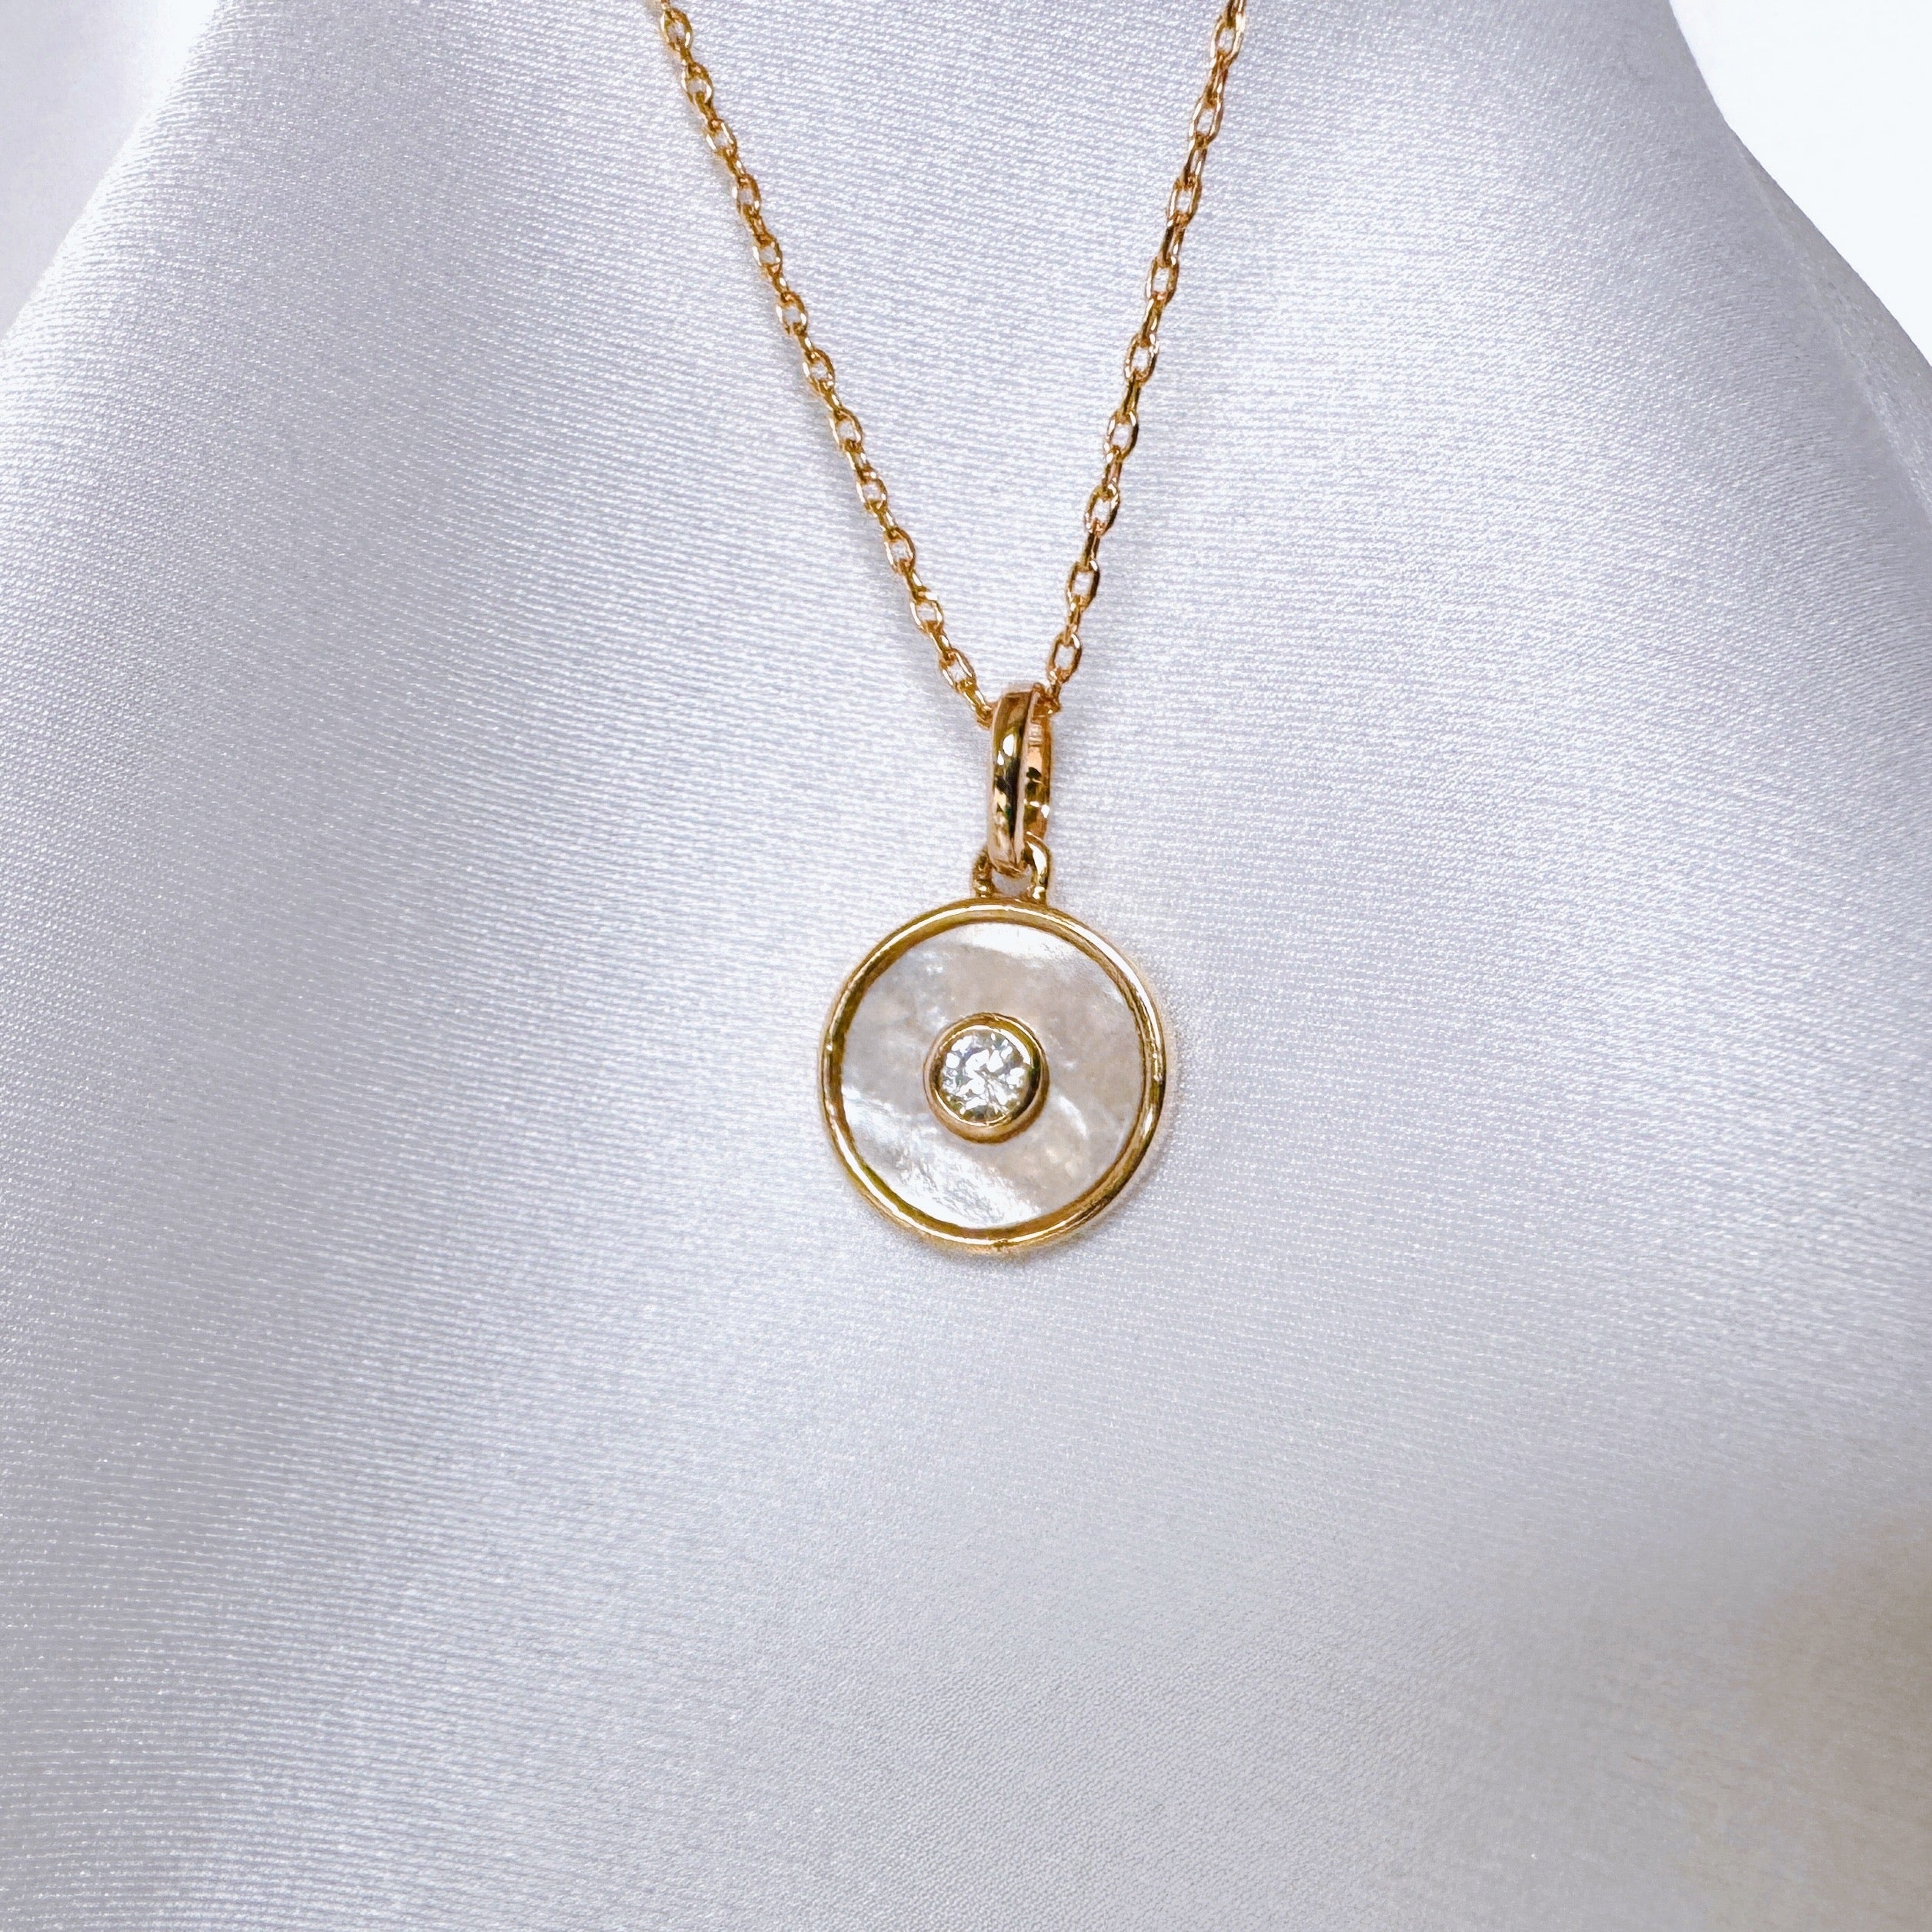 Gold-plated “Small pearly medal” necklace